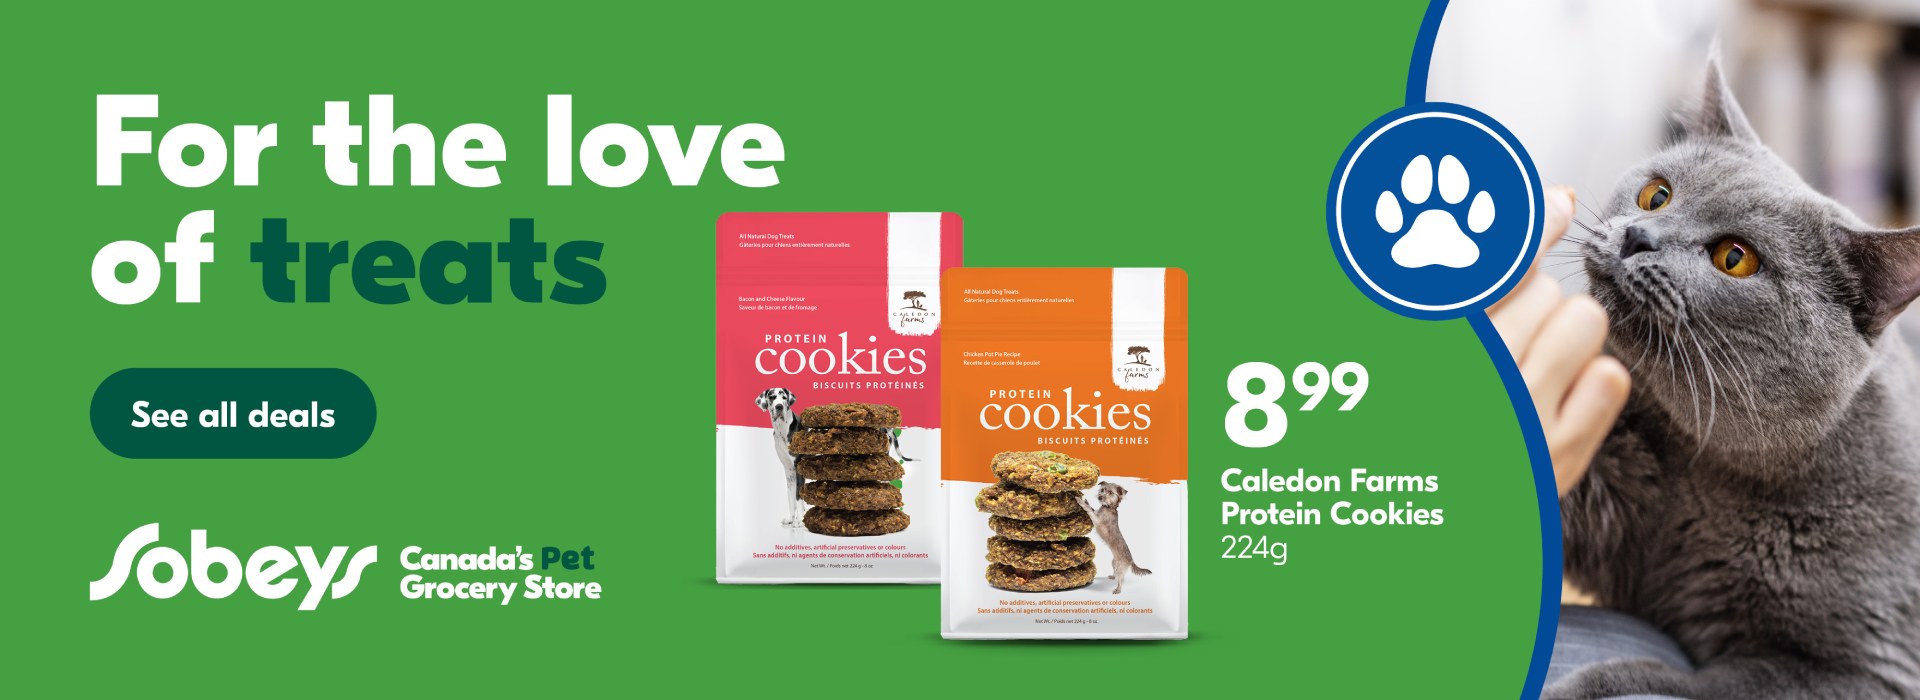 Text Reading 'For the love of treats, buy Caledon Farms Protein Cookies (224g) for just $8.99. Click on 'See all deals' button given below.'